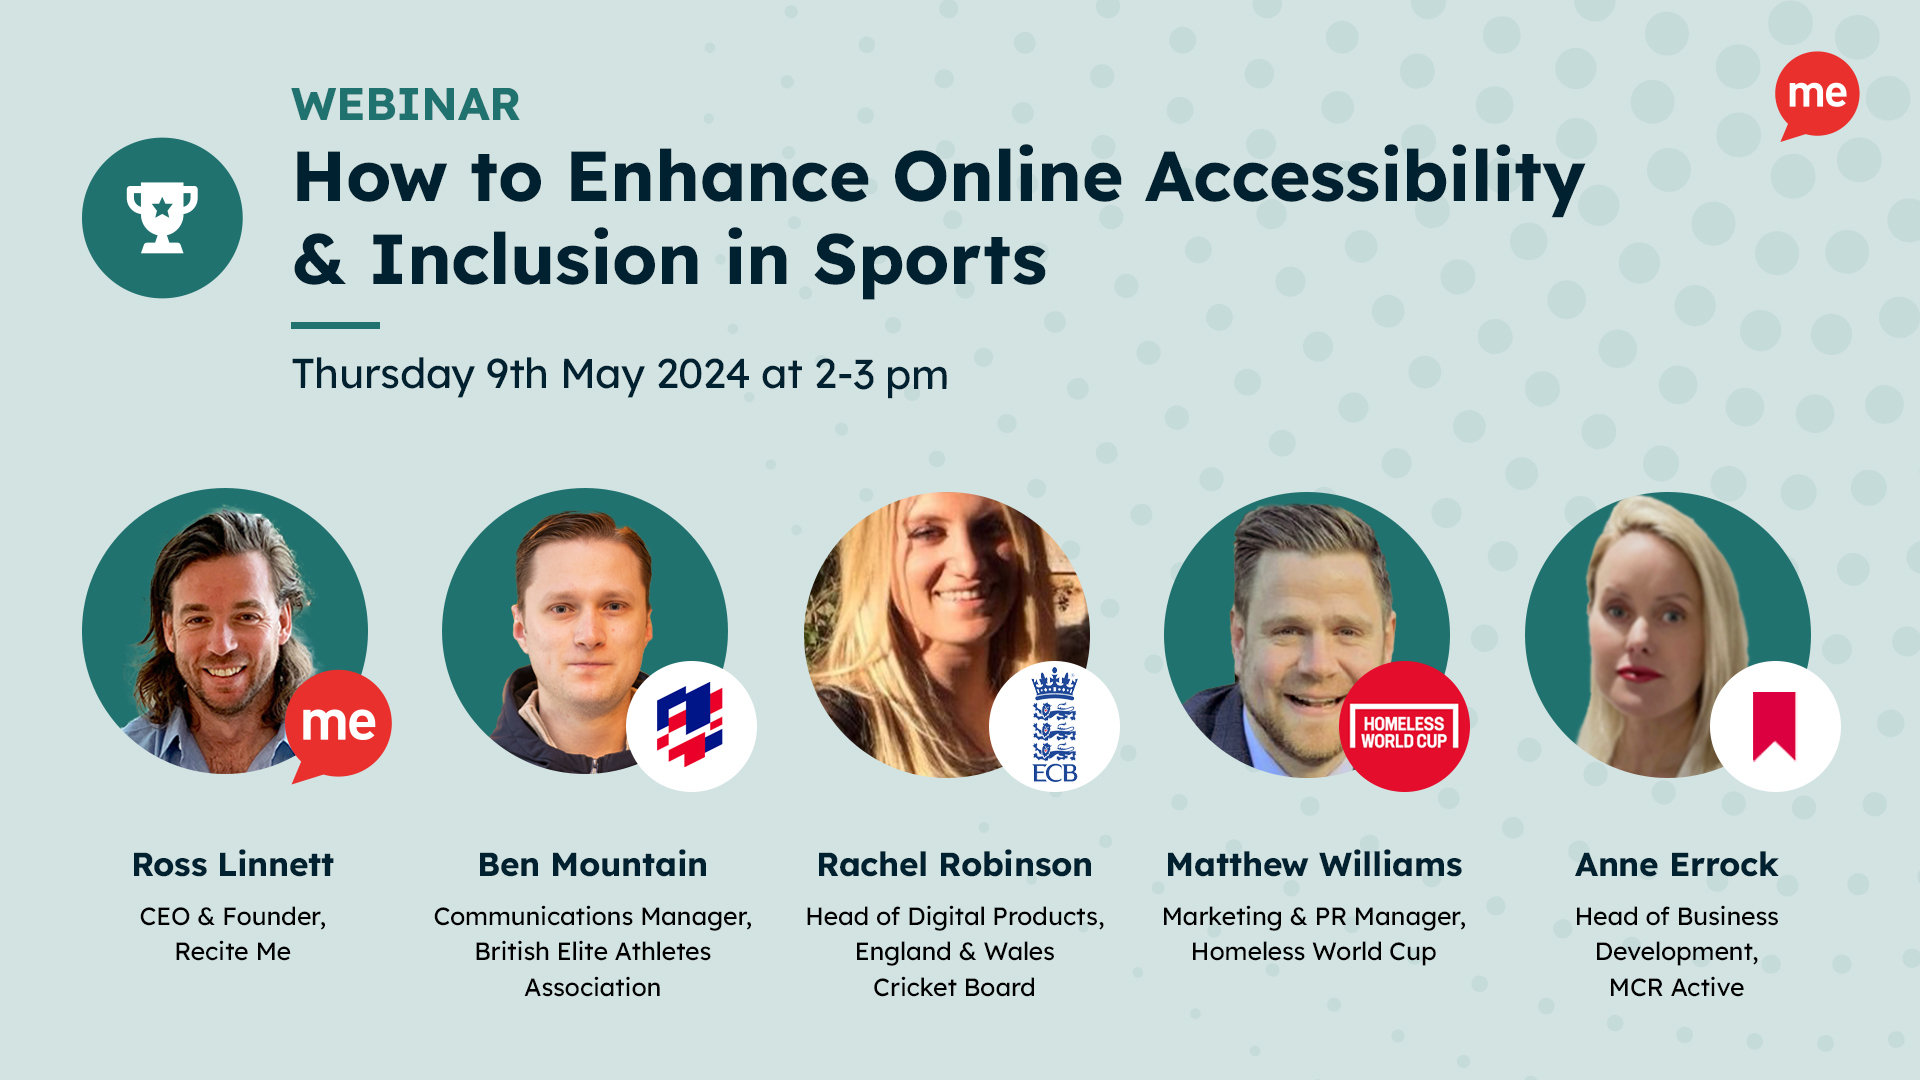 image shows headshots of the webinar panel and title reads Webinar: How to Enhance Online Accessibility & Inclusion in Sports